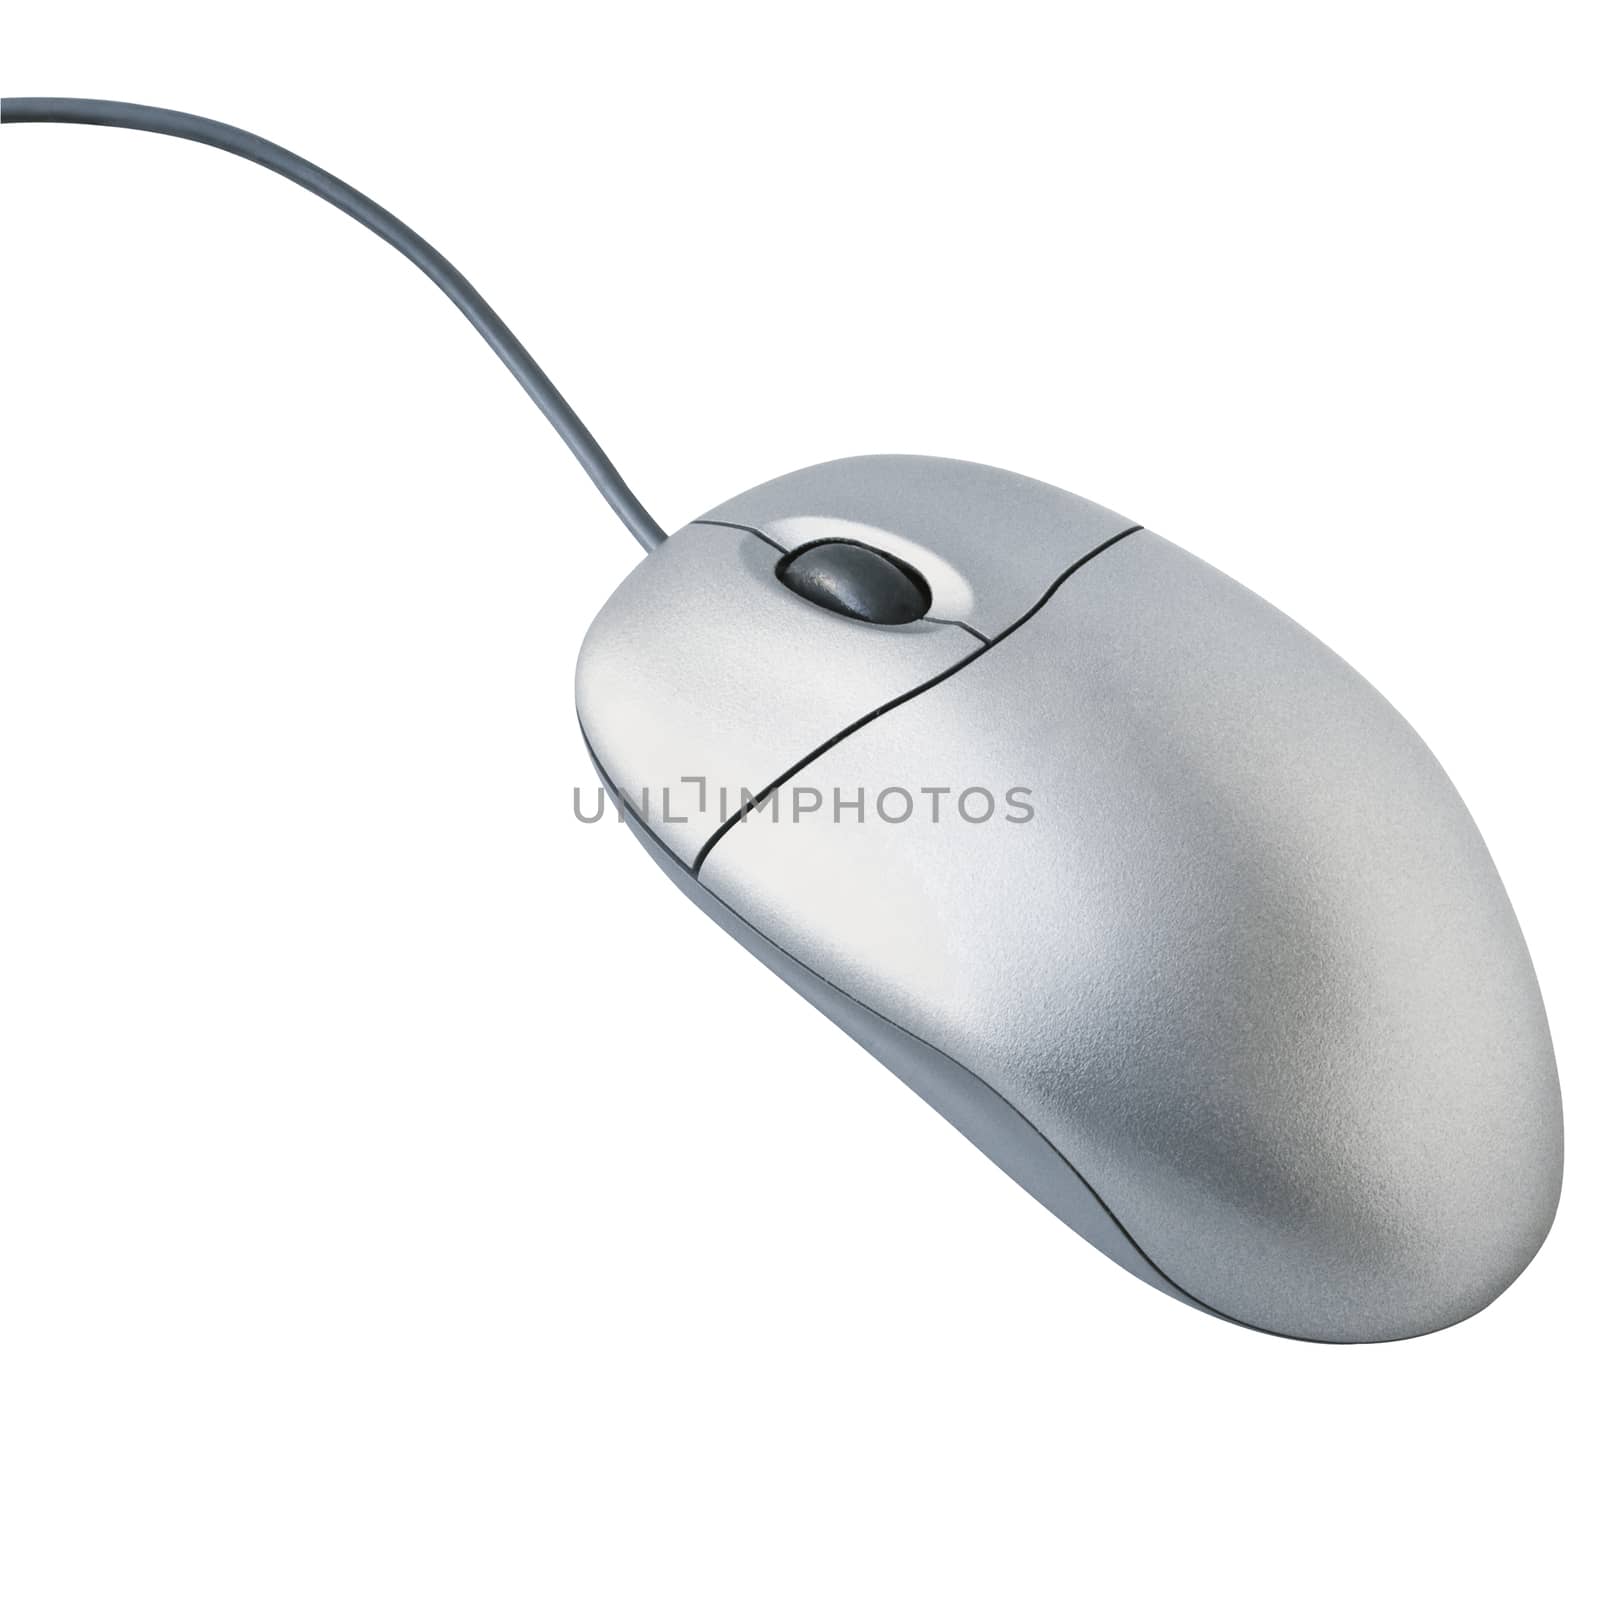 Common computer mouse input device with left and right buttons and a scroll wheel. Isolated on a white background with a clipping path